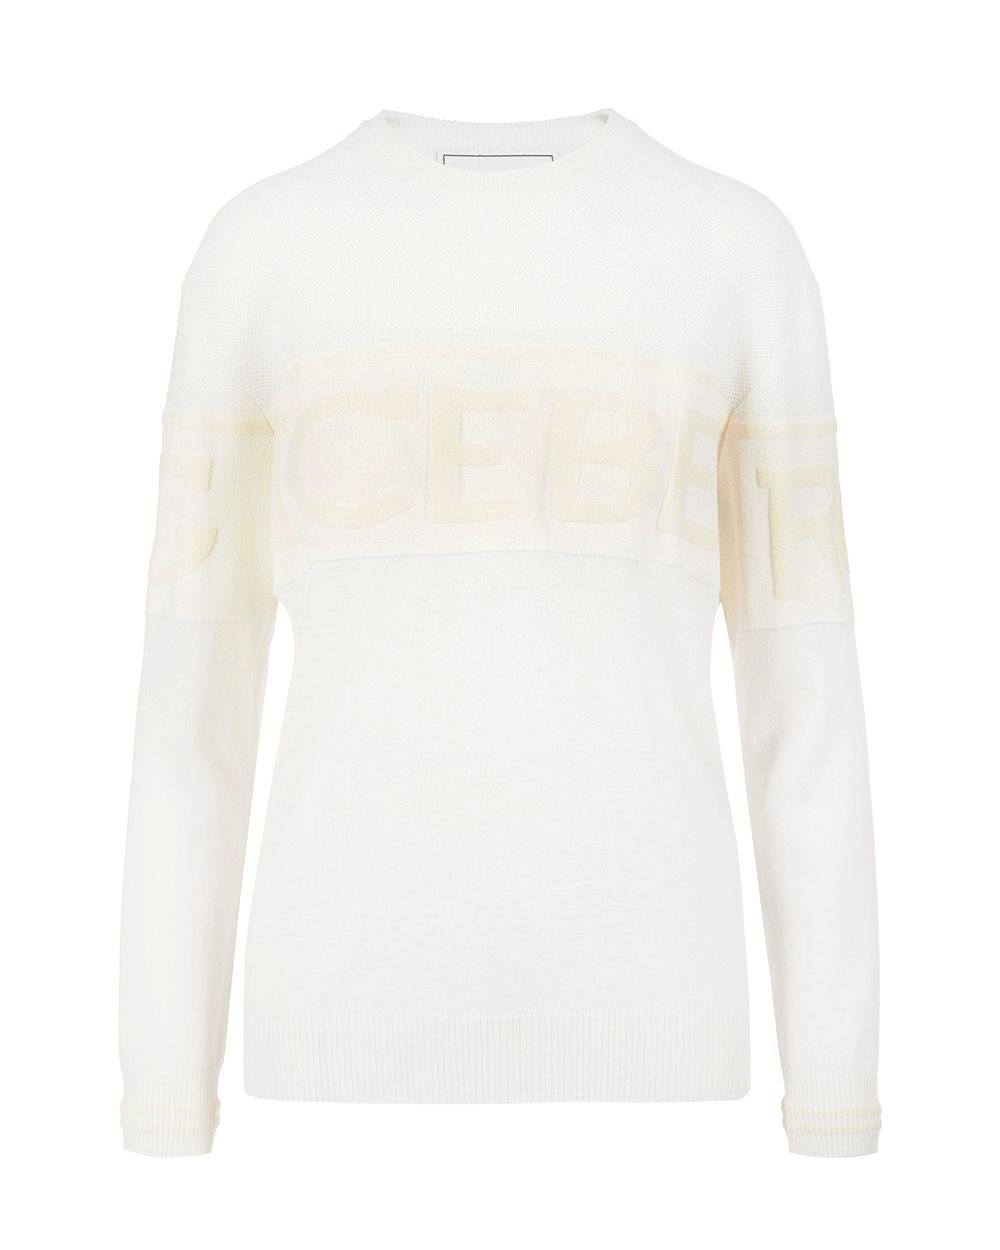 Carry over sweater with logo | Iceberg - Official Website